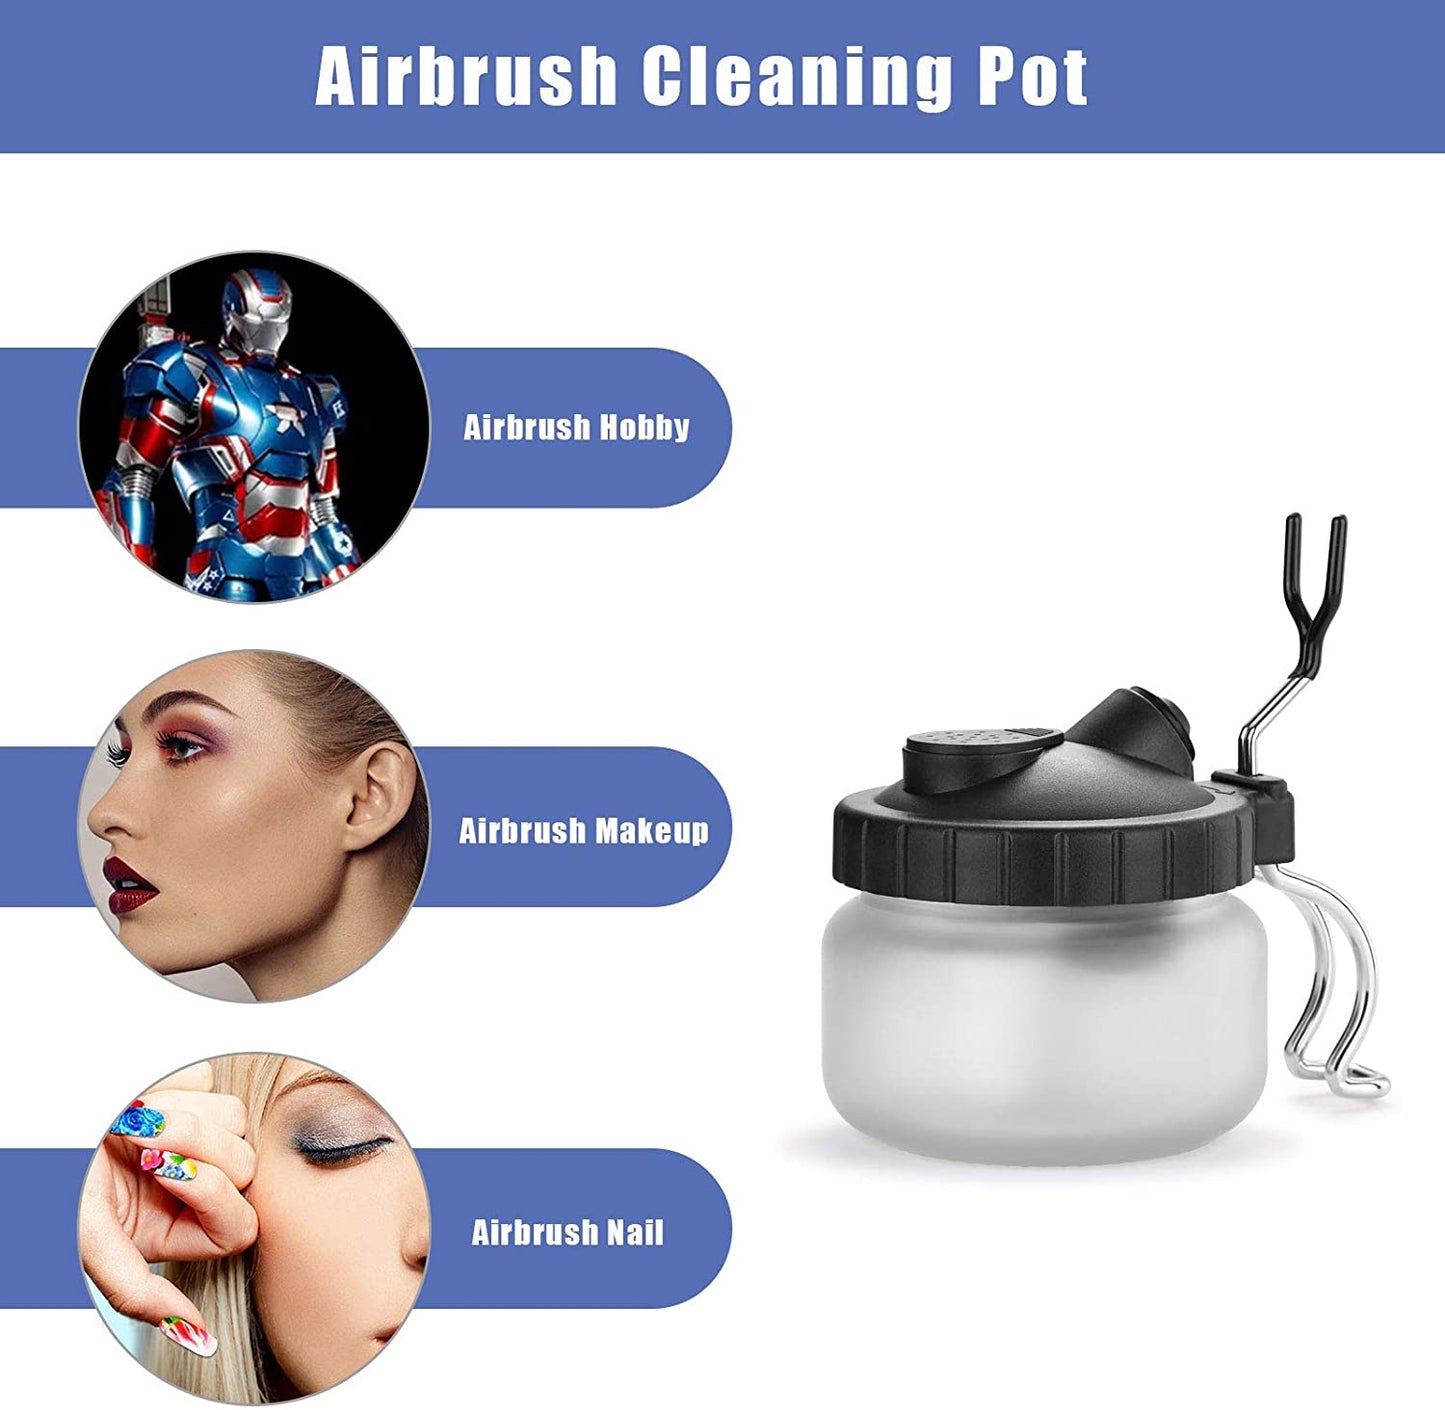 Airbrush Cleaning Kit, AGPTEK Glass Airbrush Cleaning Pot with